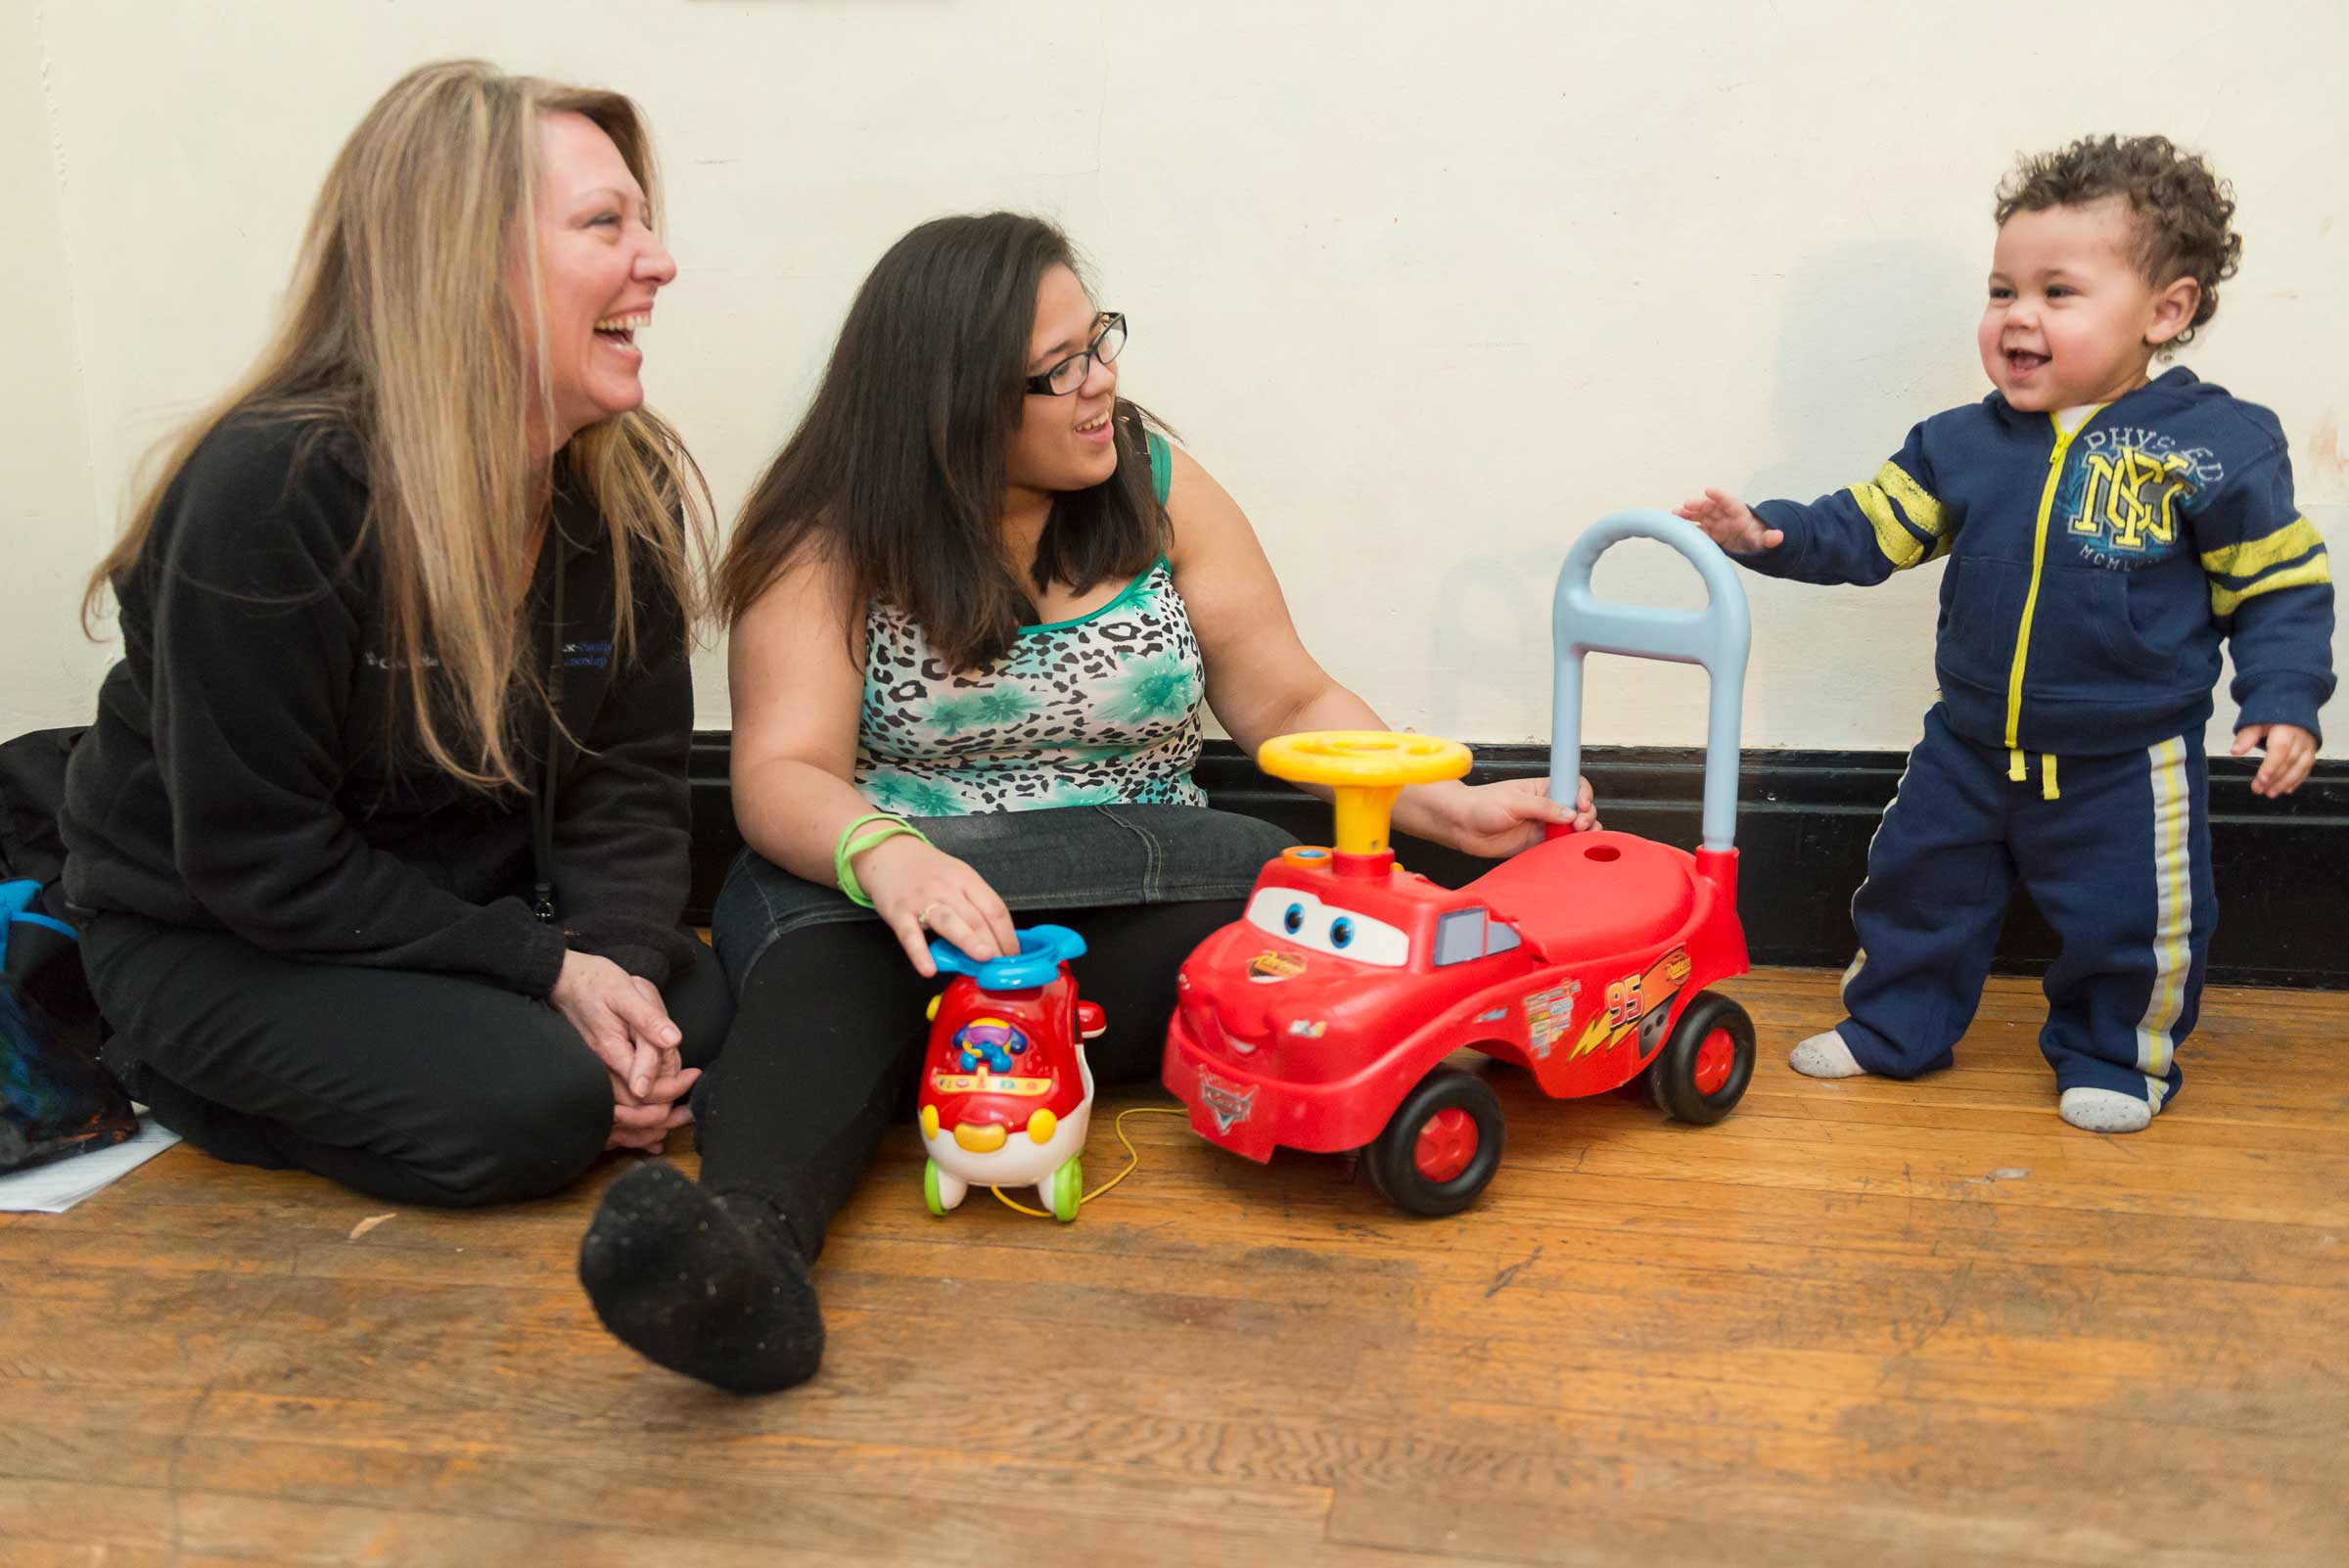 Two women smiling at a toddler who is walking towards his toy motorcycle